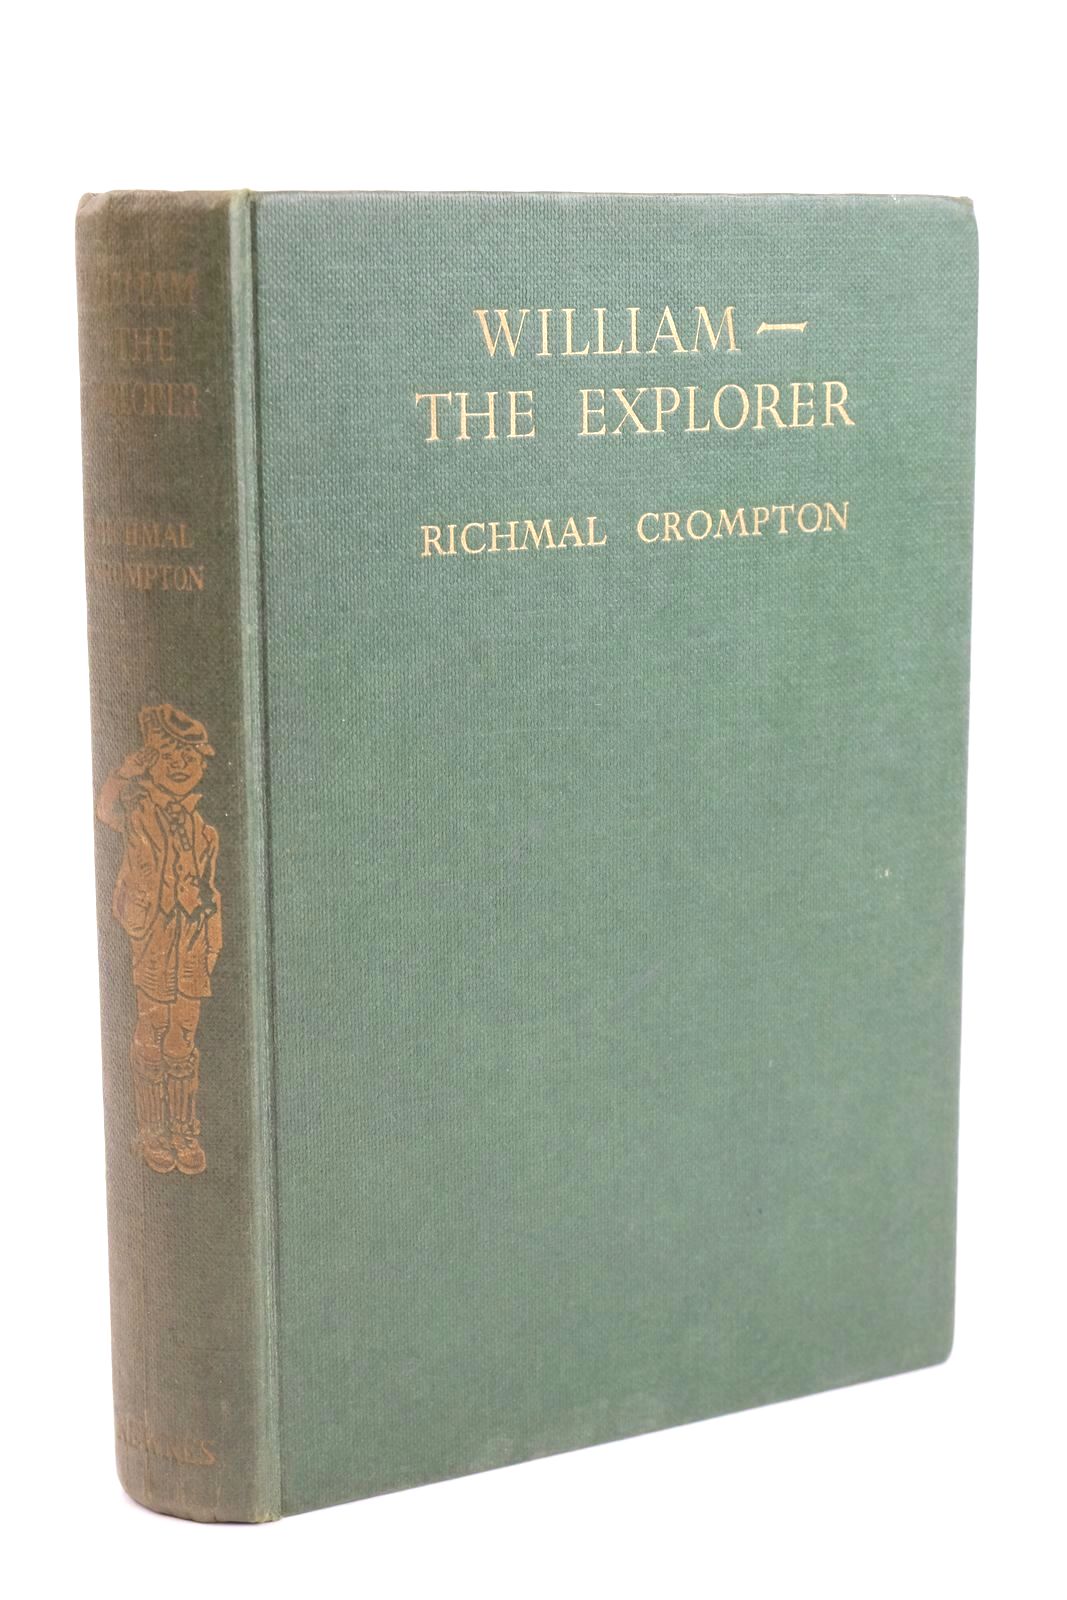 Photo of WILLIAM THE EXPLORER written by Crompton, Richmal illustrated by Henry, Thomas published by George Newnes (STOCK CODE: 1323690)  for sale by Stella & Rose's Books